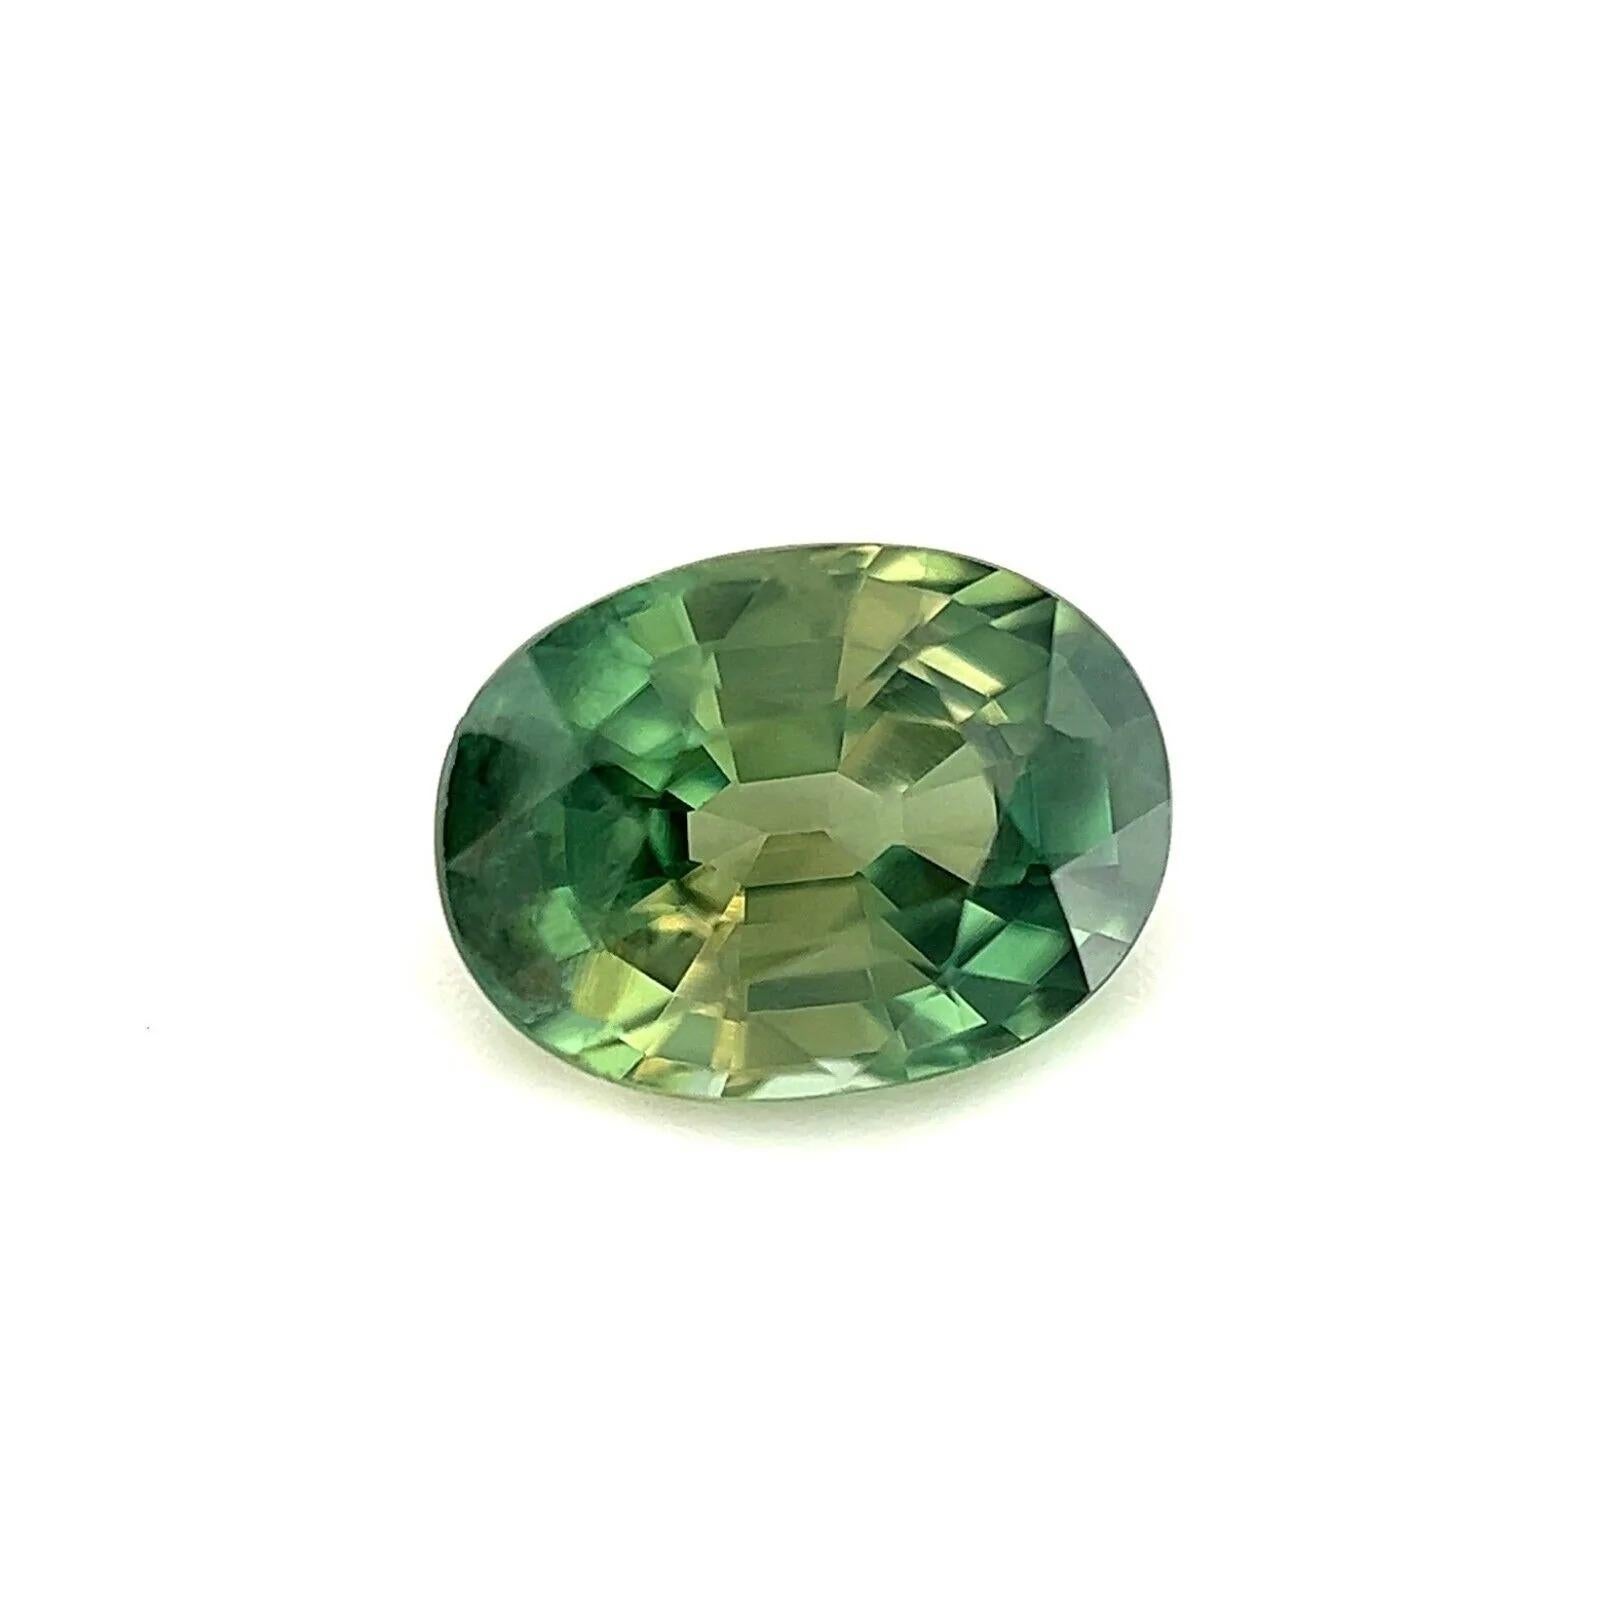 1.13ct Natural Fine Green Thailand Sapphire Oval Cut Rare Gem 6.7x5mm

Natural Green Thai Sapphire Gemstone.
1.13 Carat sapphire with a beautiful bright green colour. Also has very good clarity, some small natural inclusions visible but not a dirty